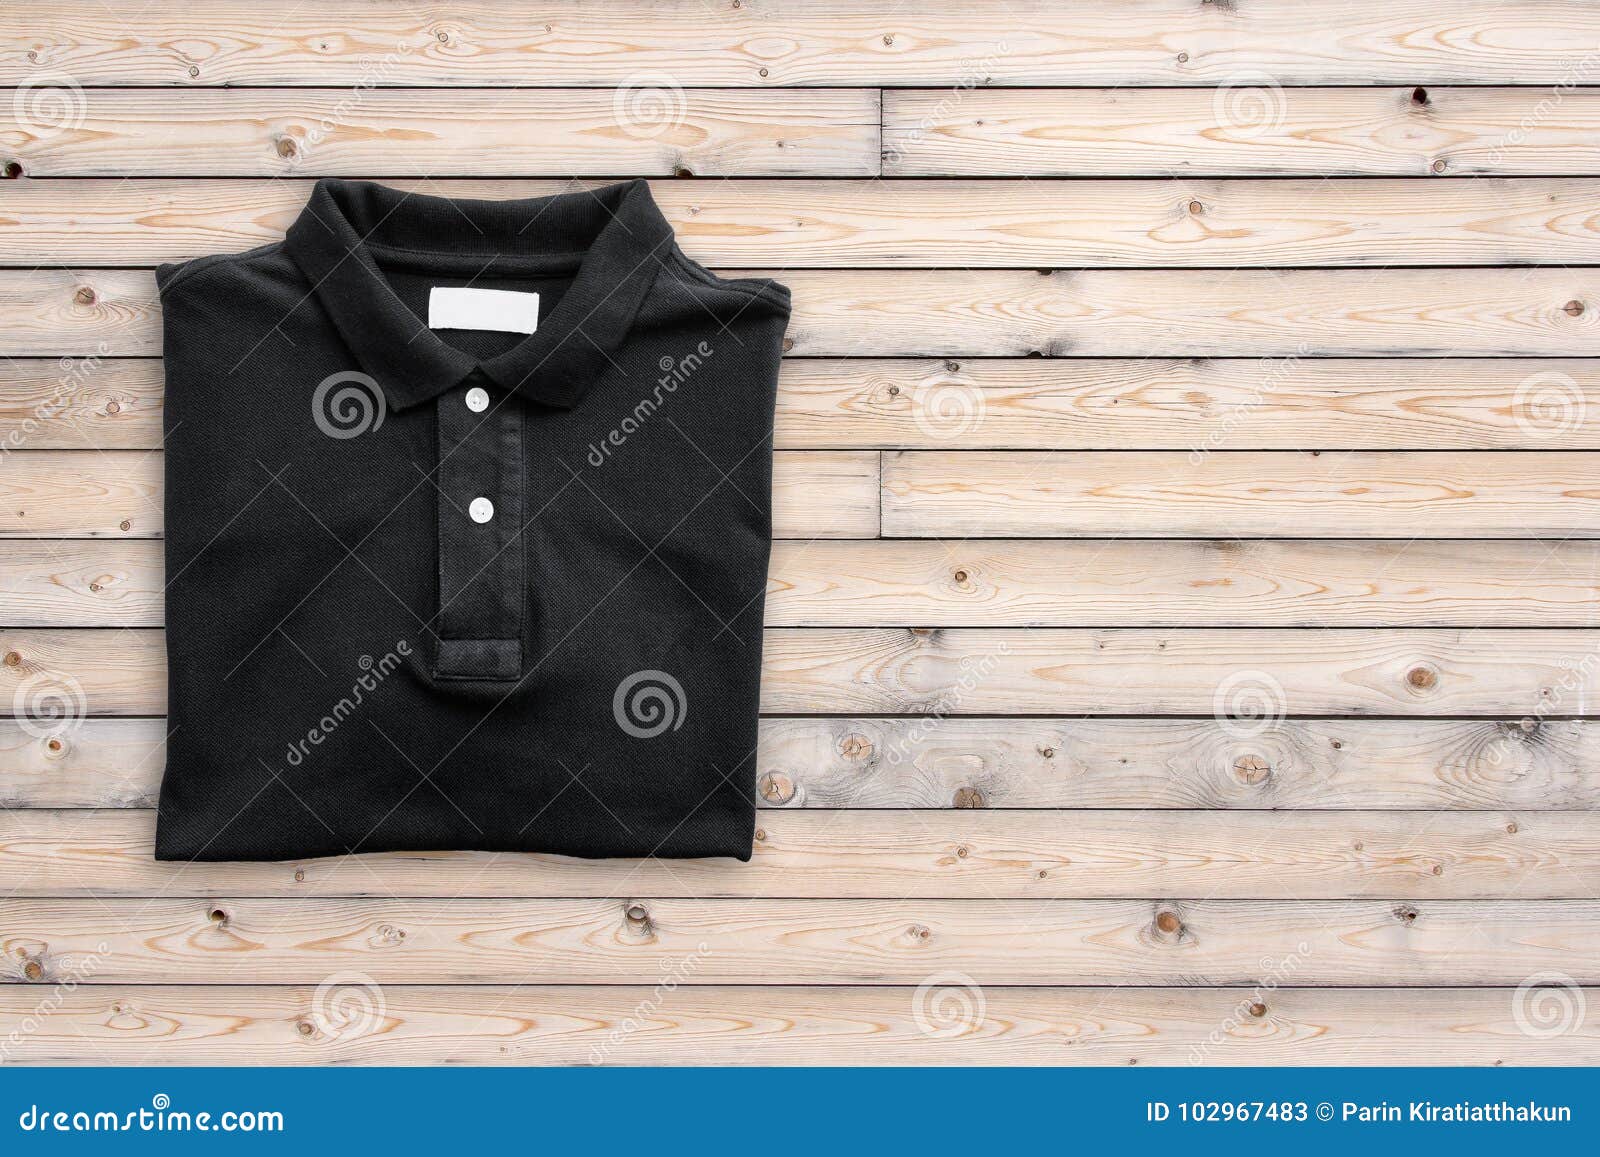 Top View of T-shirt on Old Wood Floor Background Stock Image - Image of ...